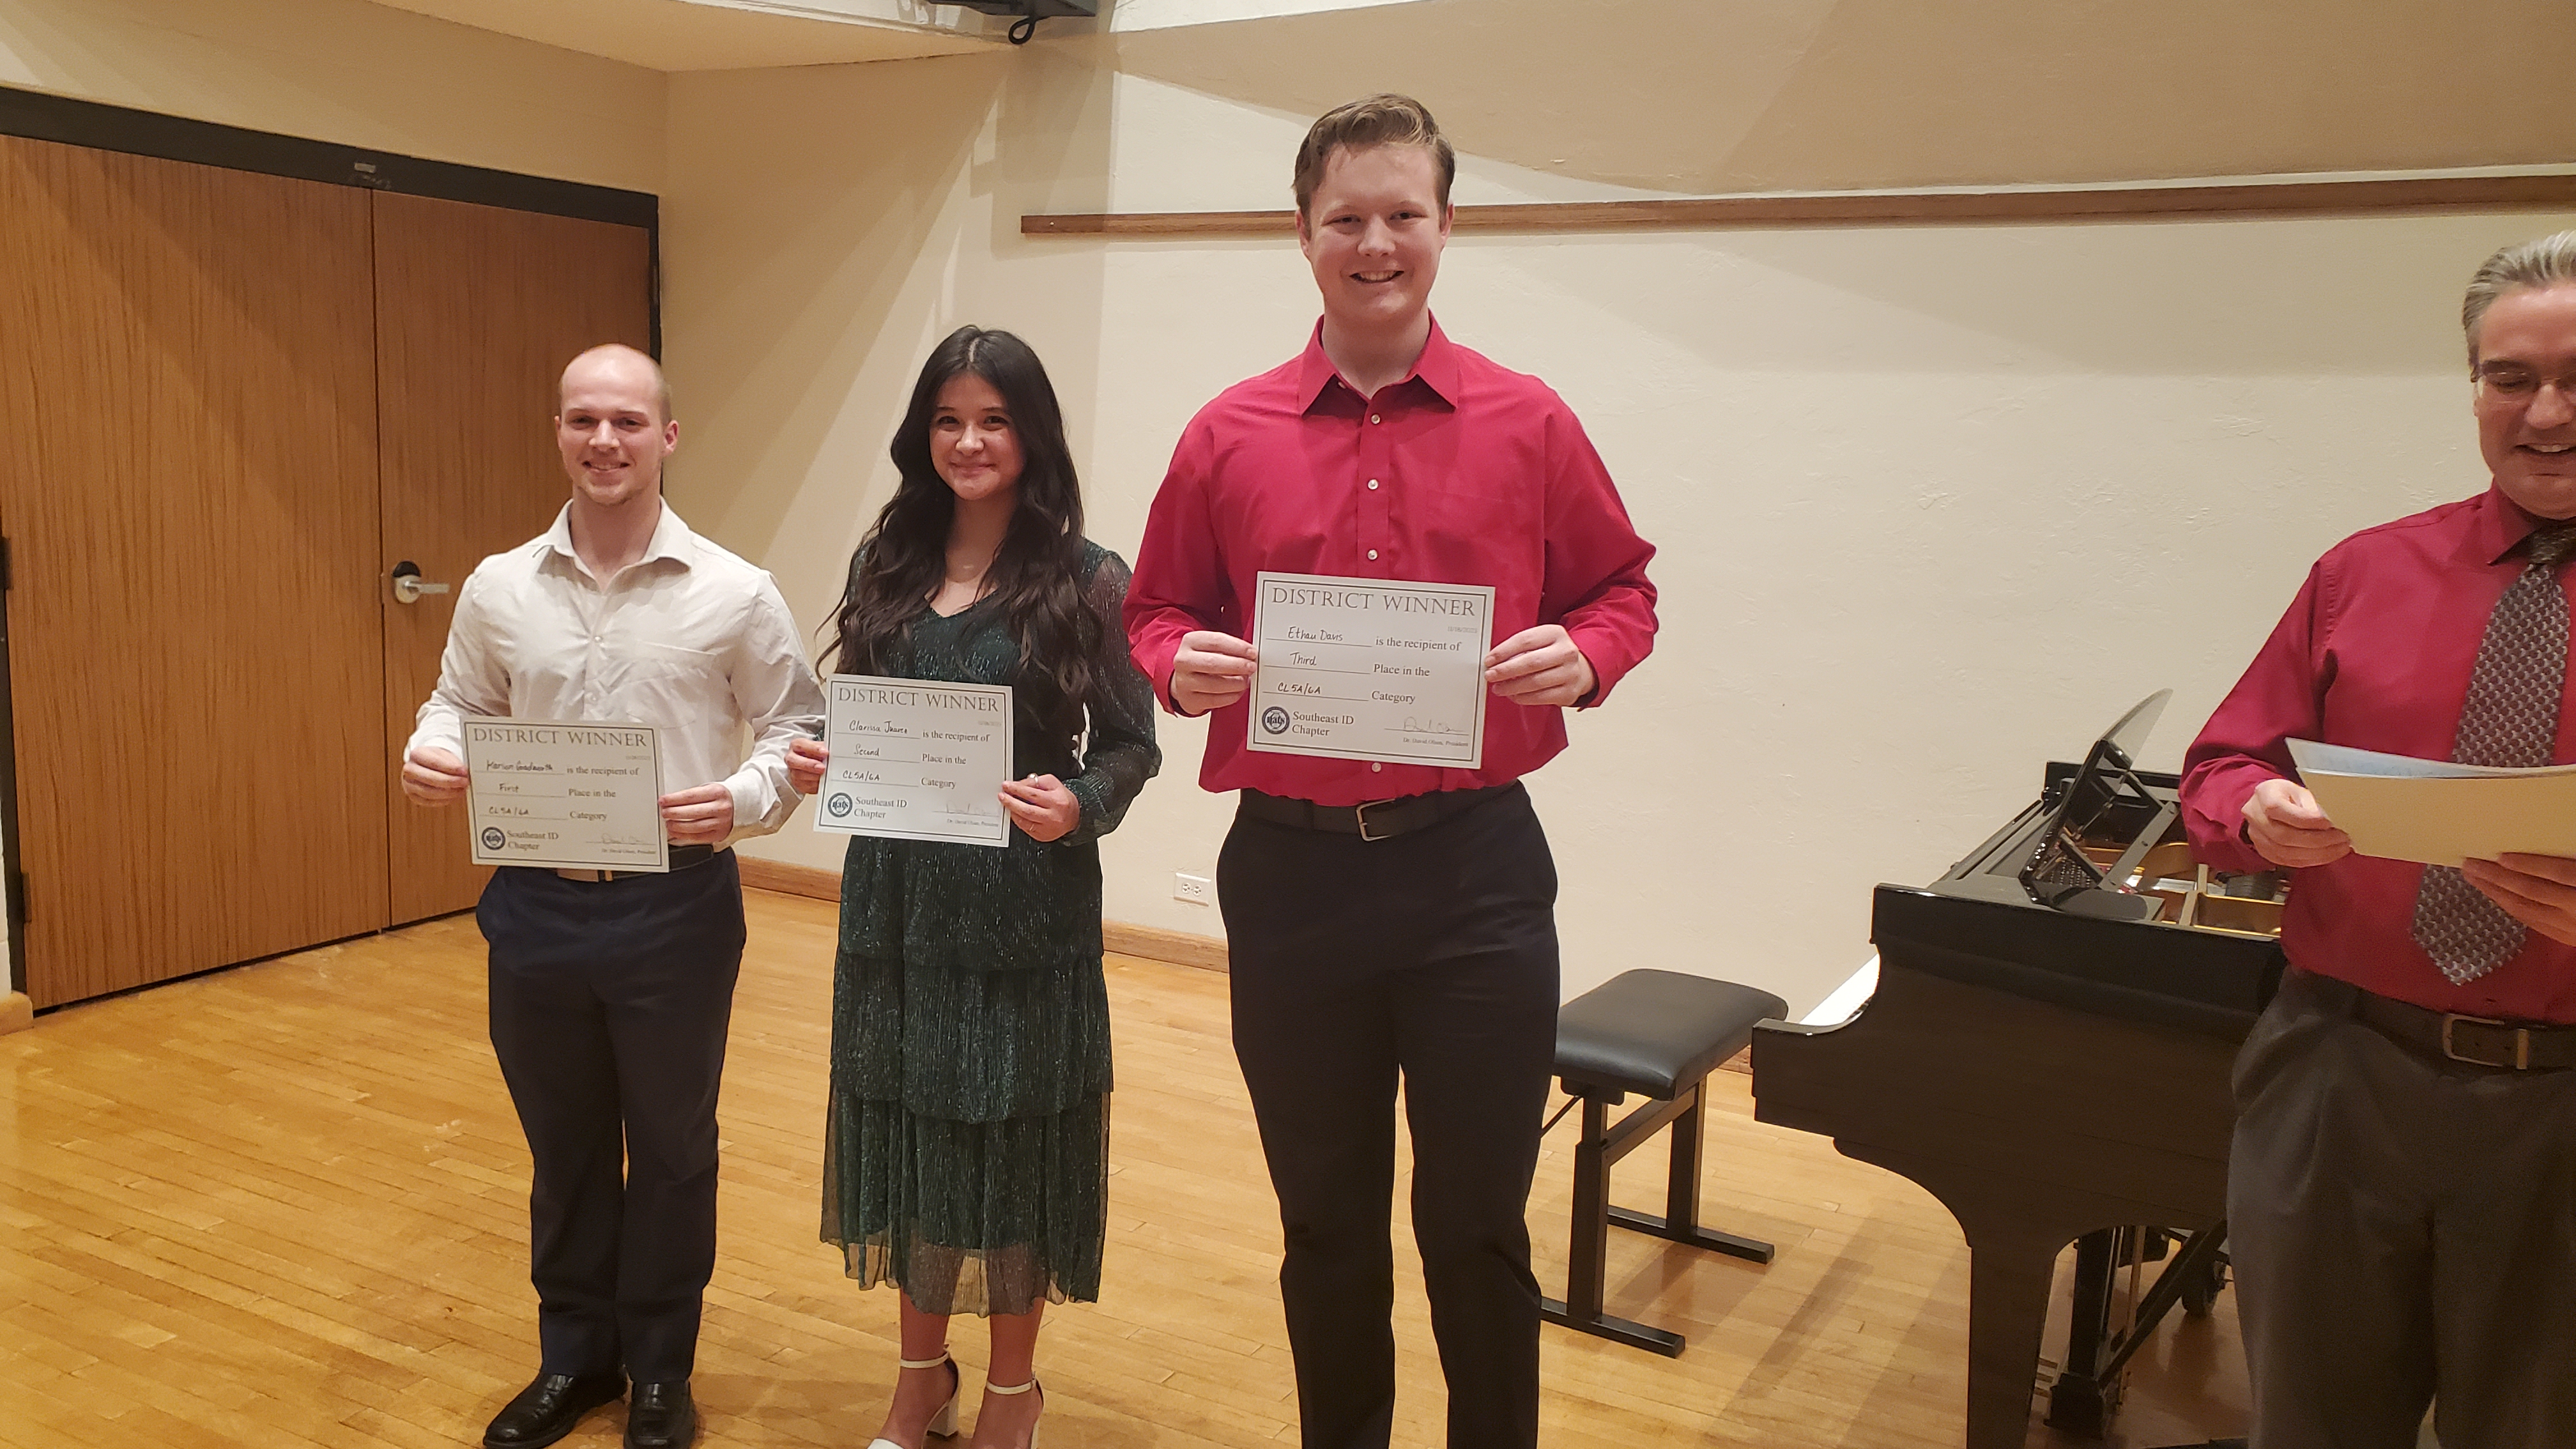 3 winning students pose with certificates in front of a grand piano